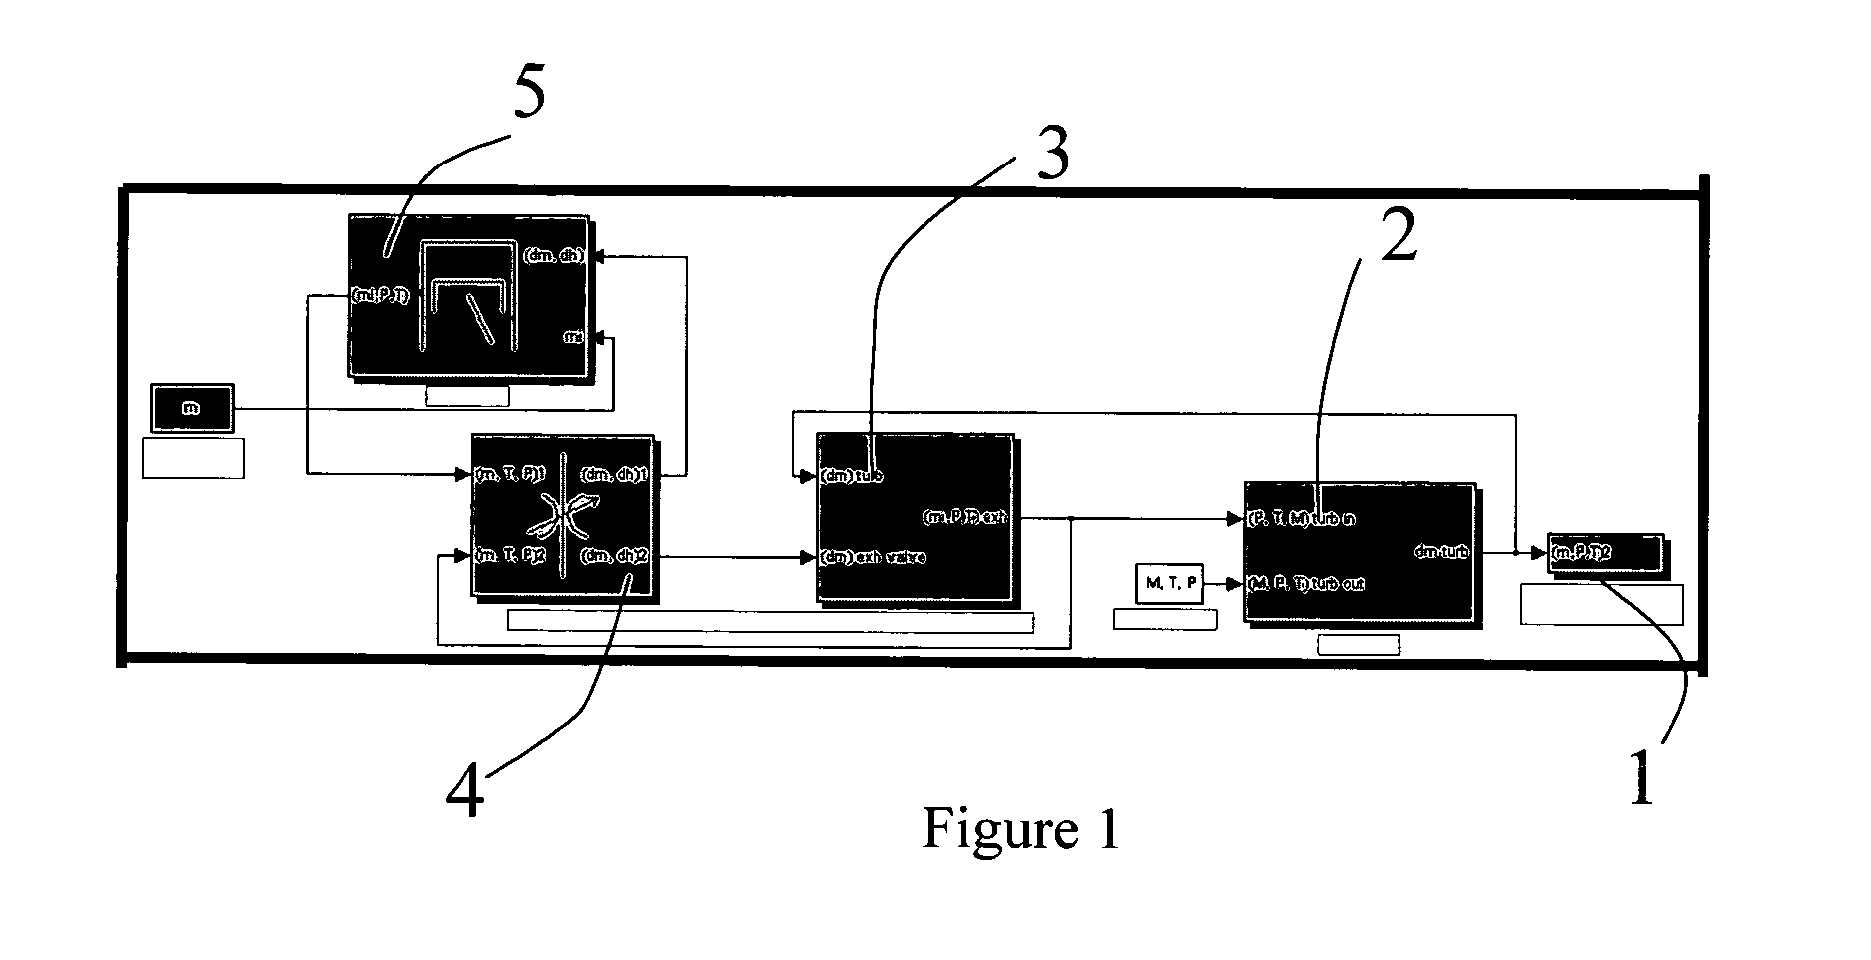 Method of estimating the fuel/air ratio in a cylinder of an internal-combustion engine